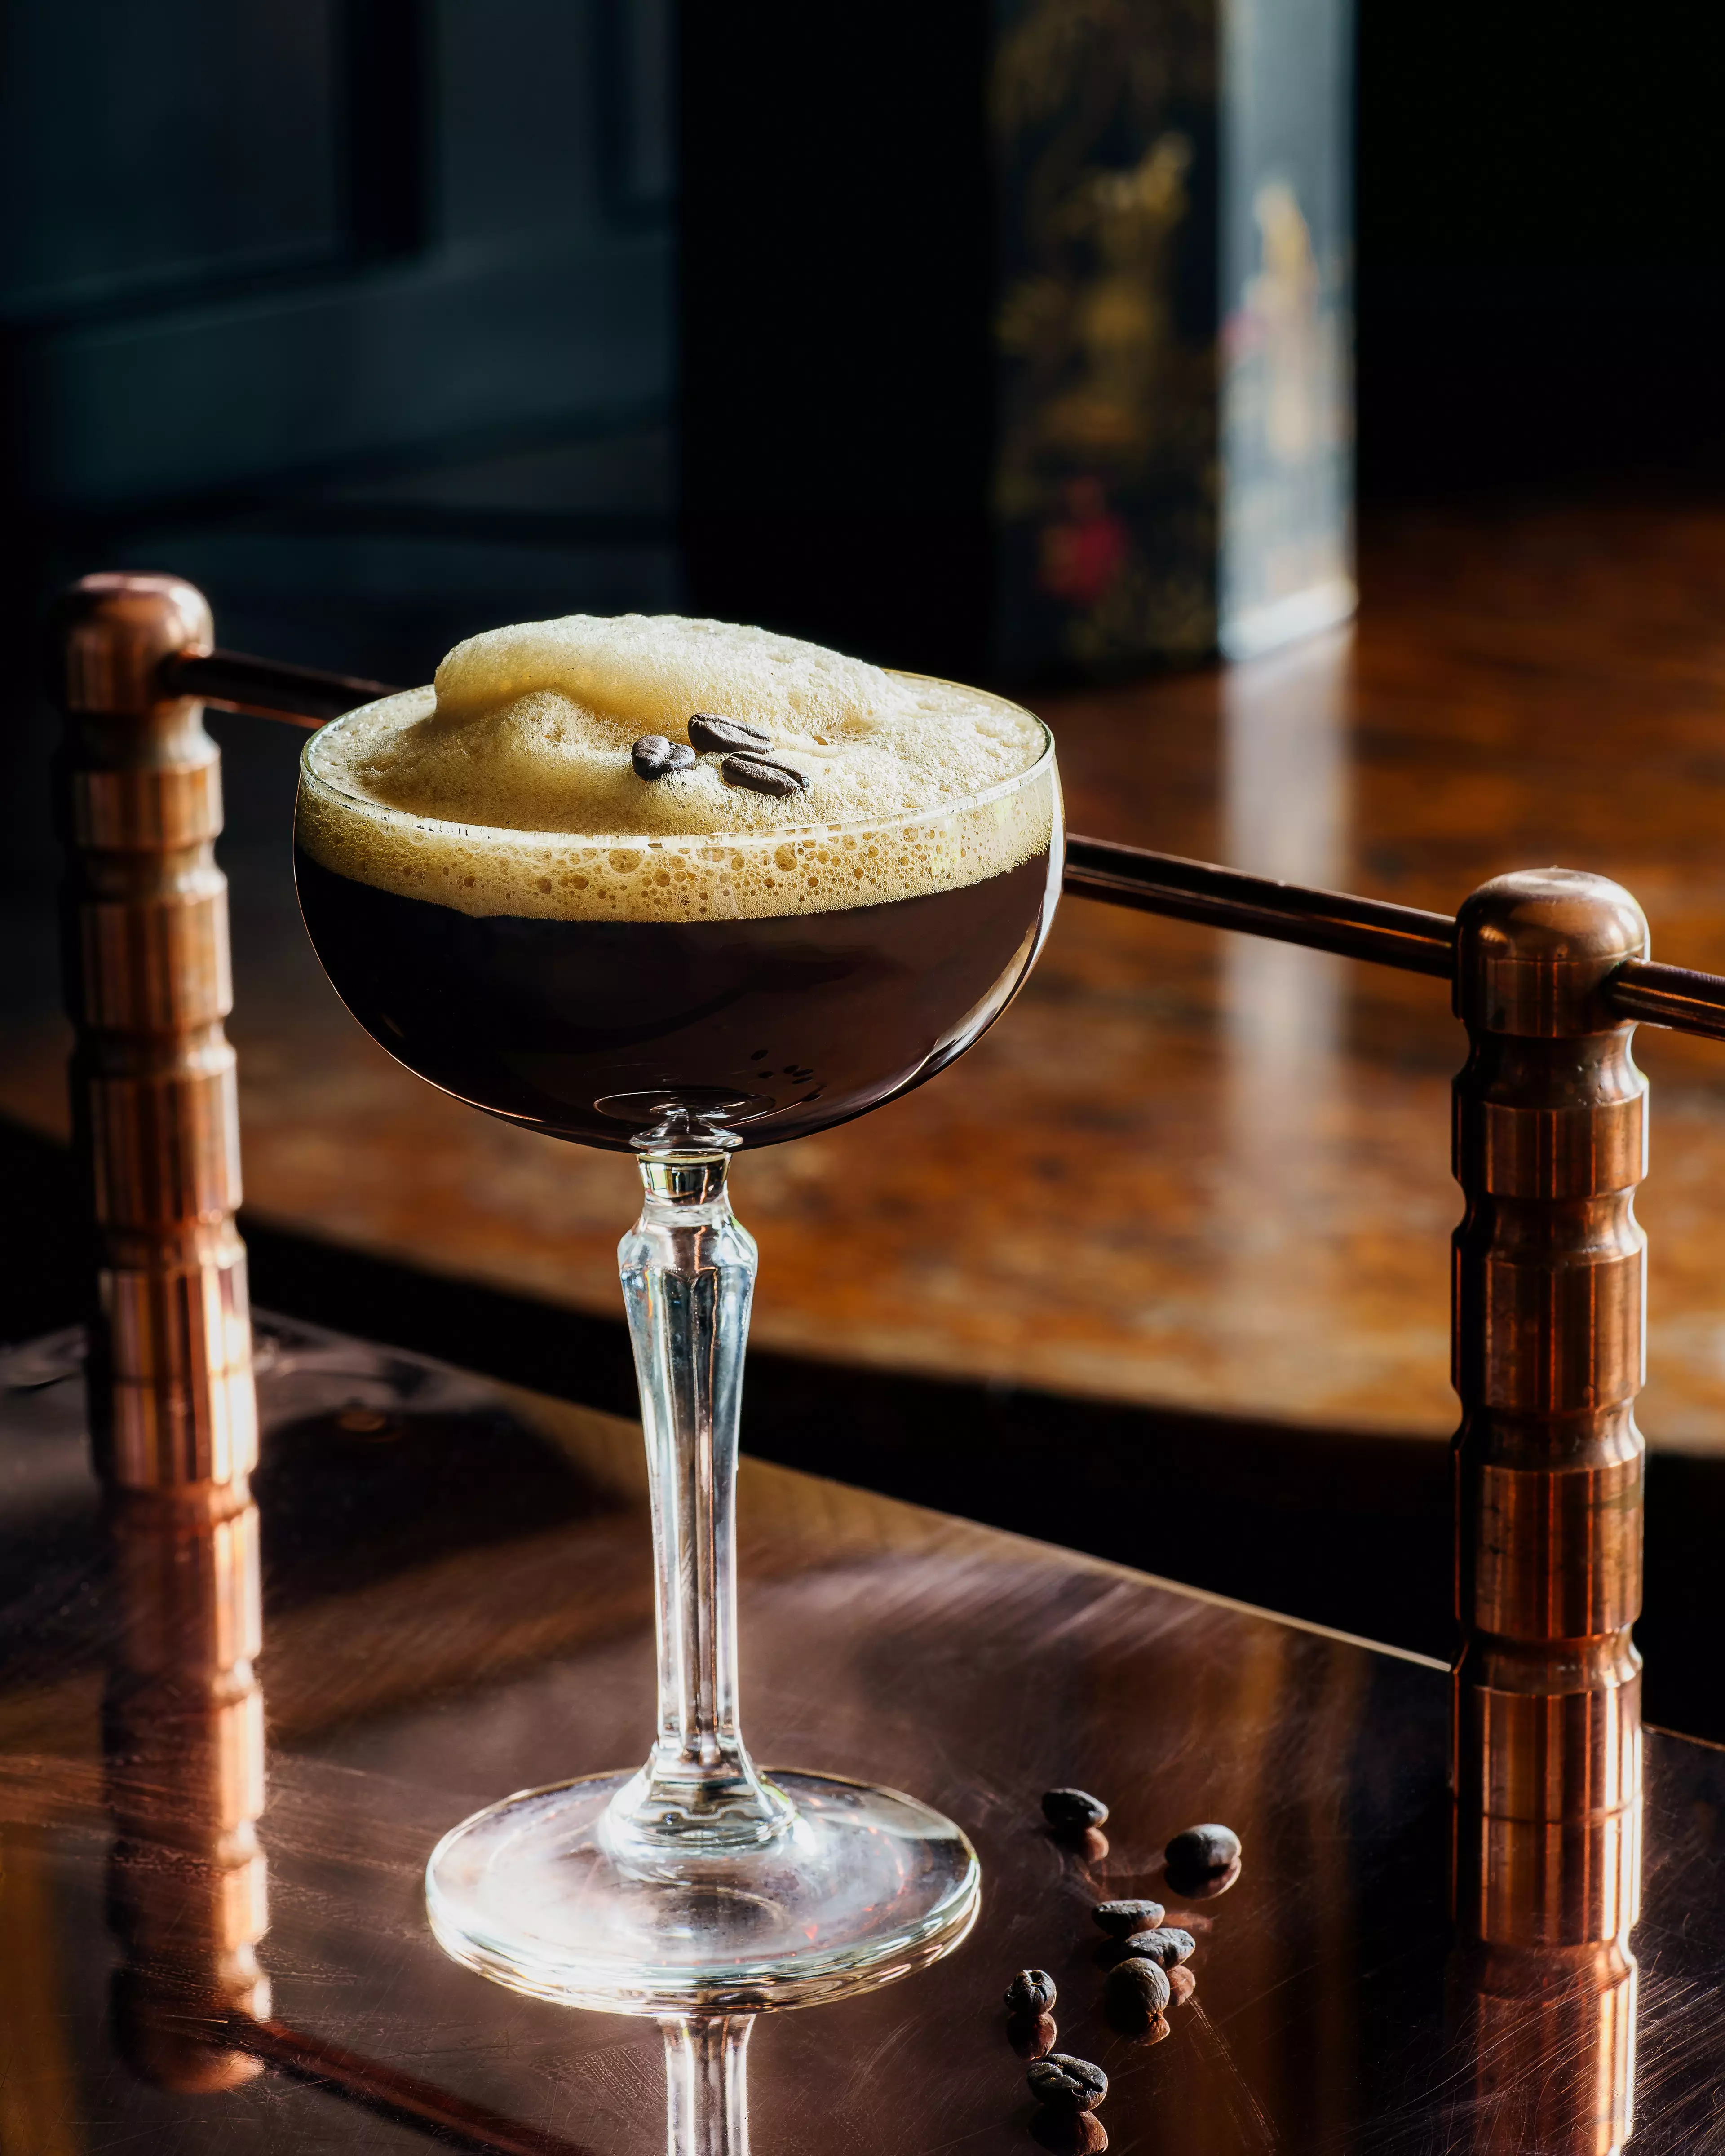 If you're an espresso martini fan, this one is for you (